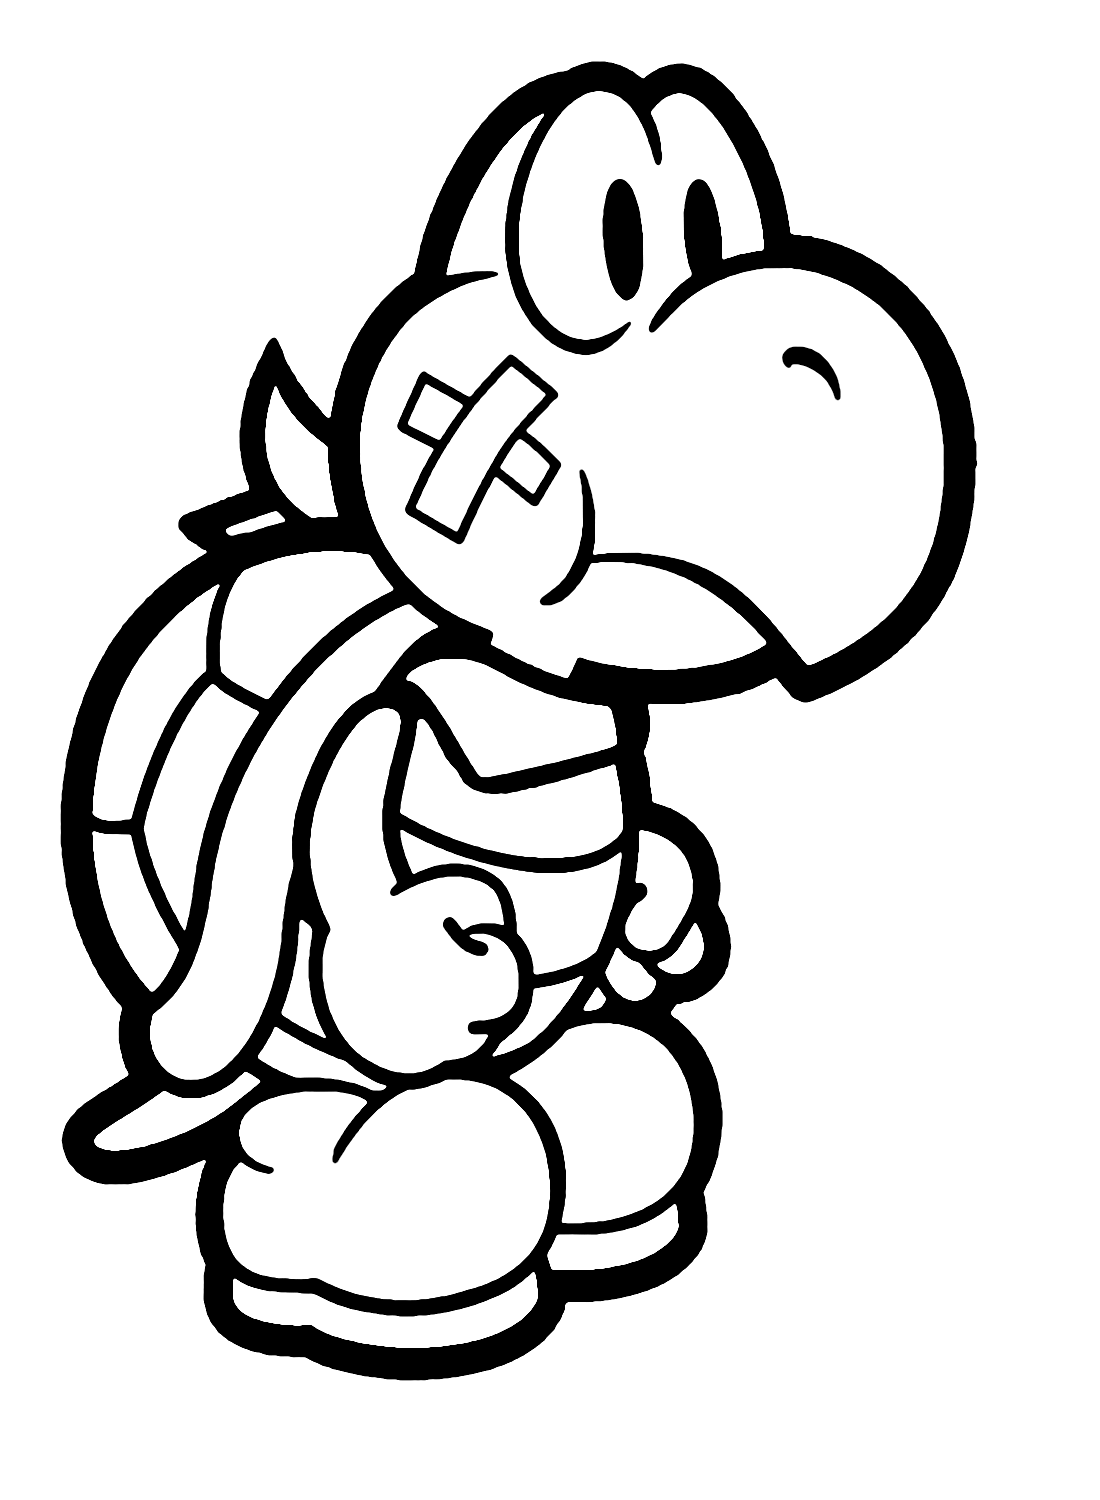 koopa coloring pages